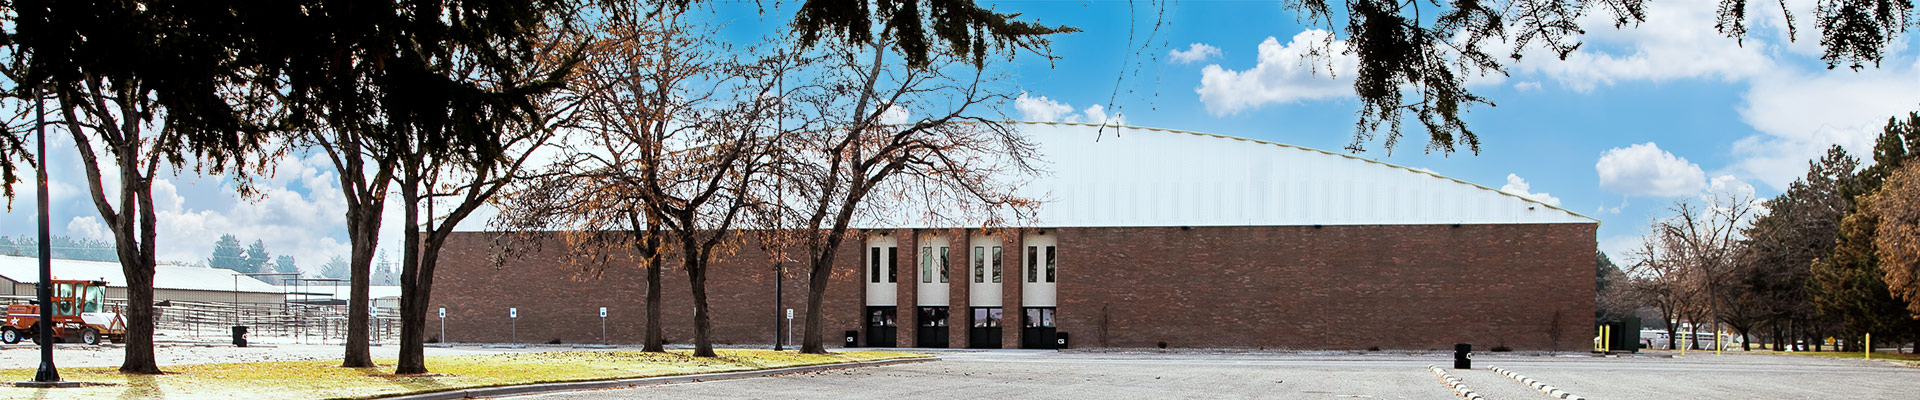 Large Brick building with large parking lot and corrals for animals.